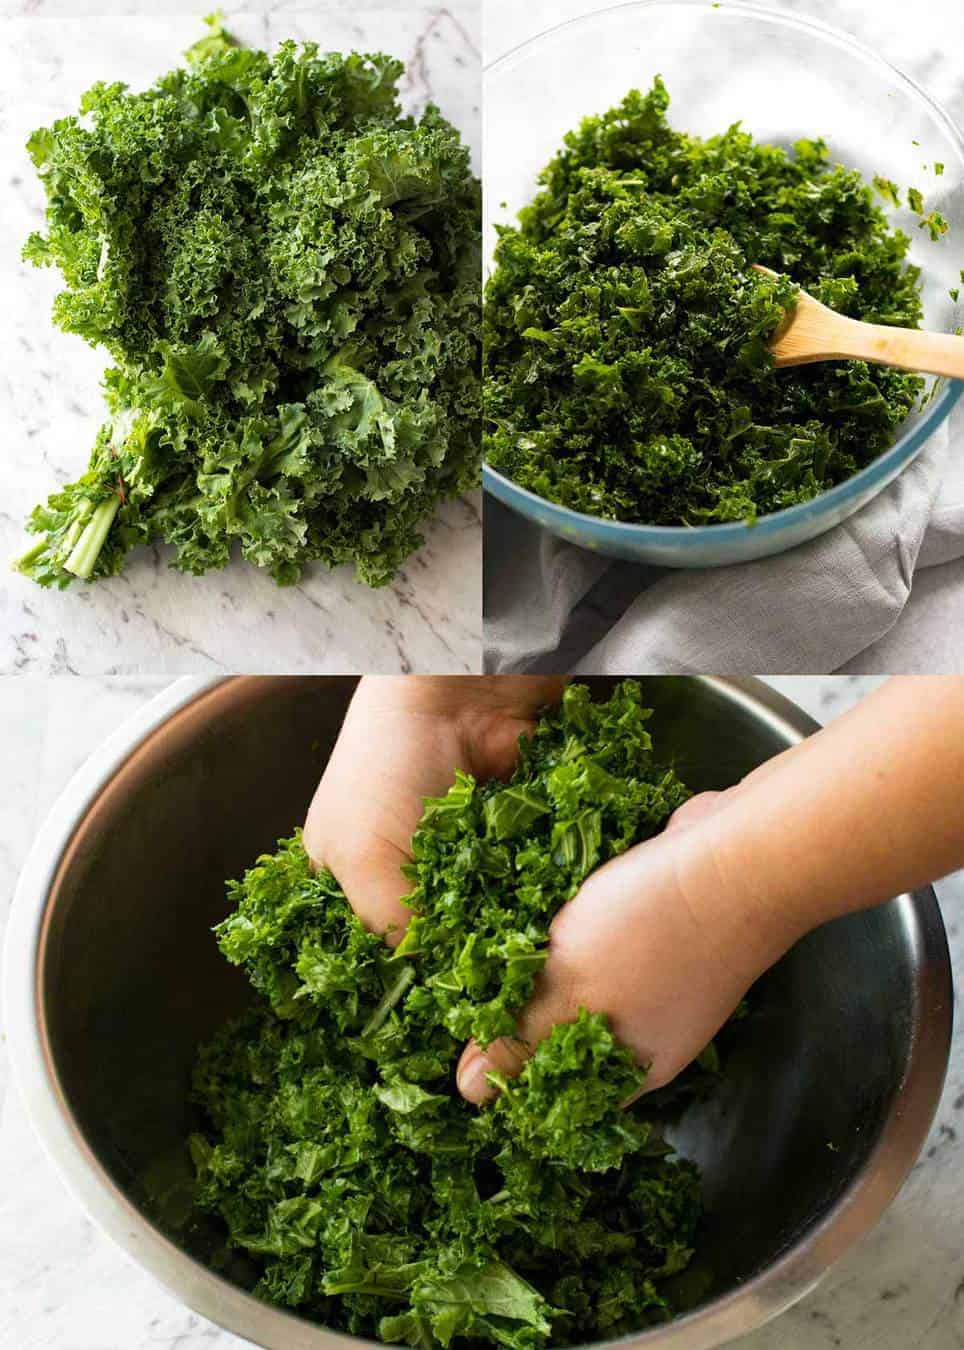 Hands in a silver bowl scrunching up kale leaves drizzled with olive oil, salt and pepper.